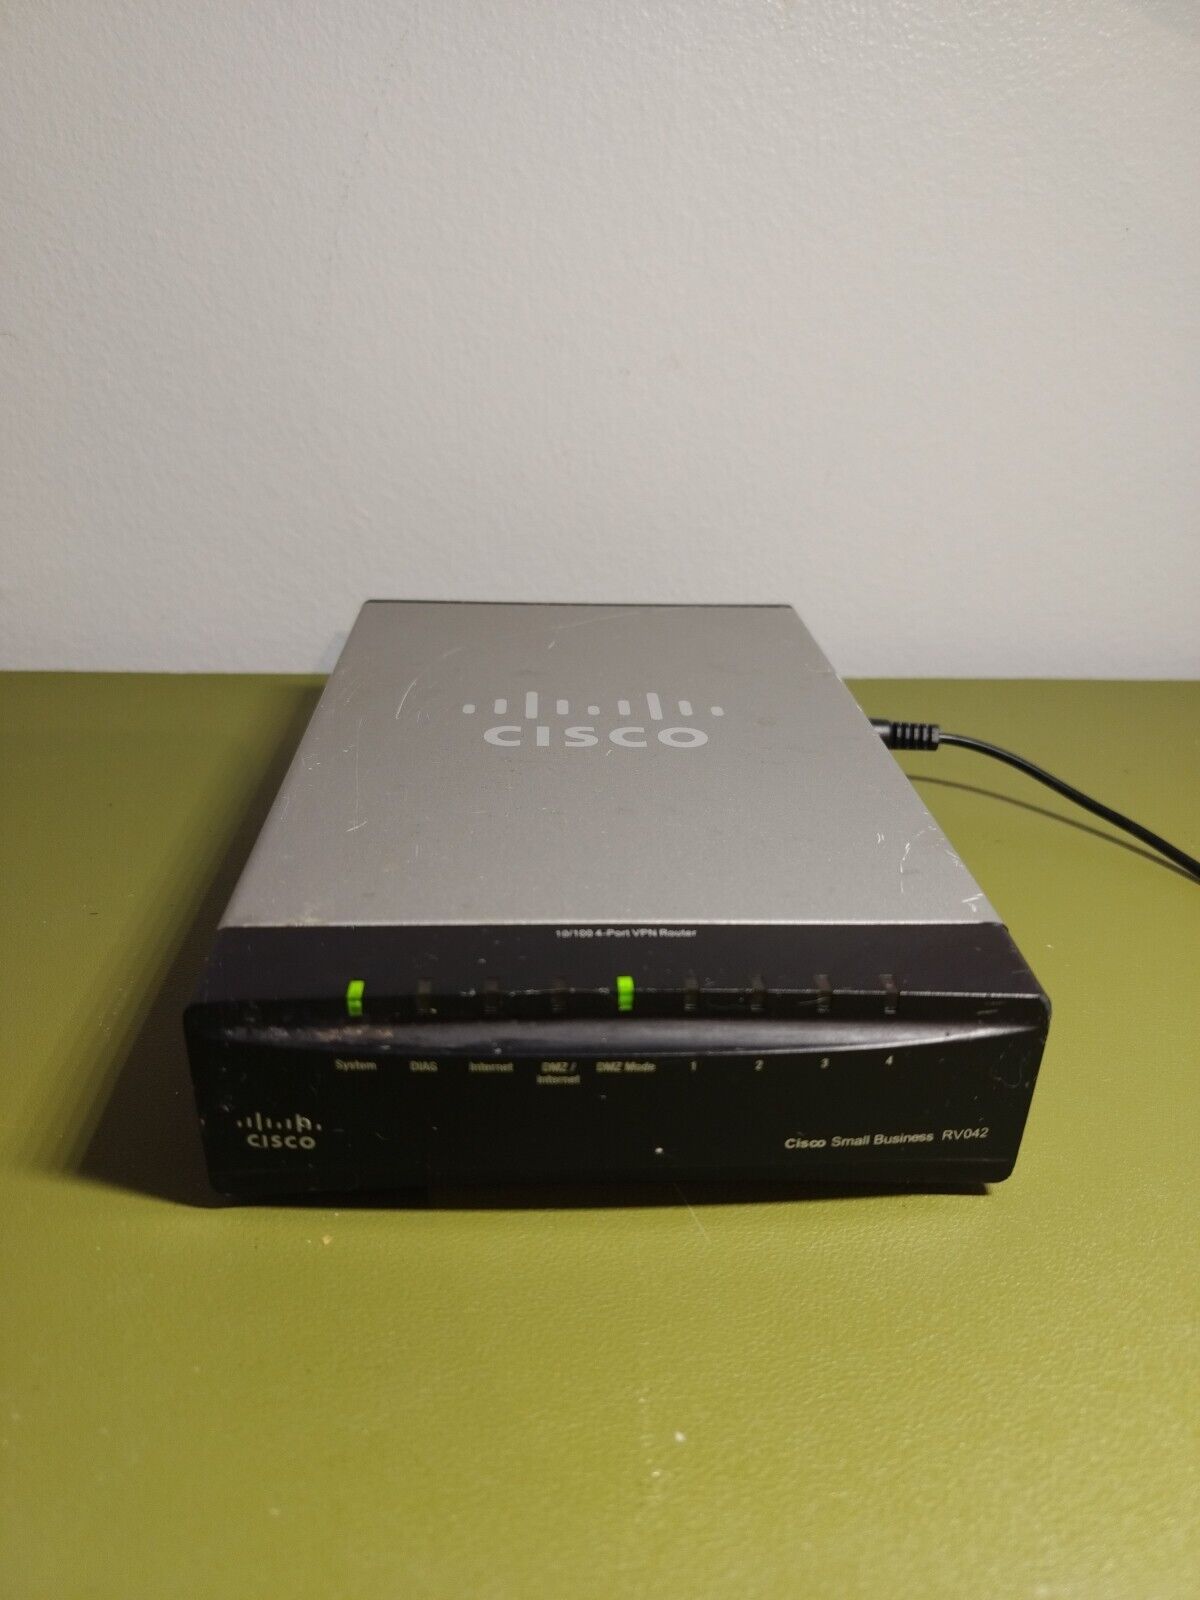 CISCO Small Business RV042 - 10/100 4 Port VPN Router W/ Power Supply